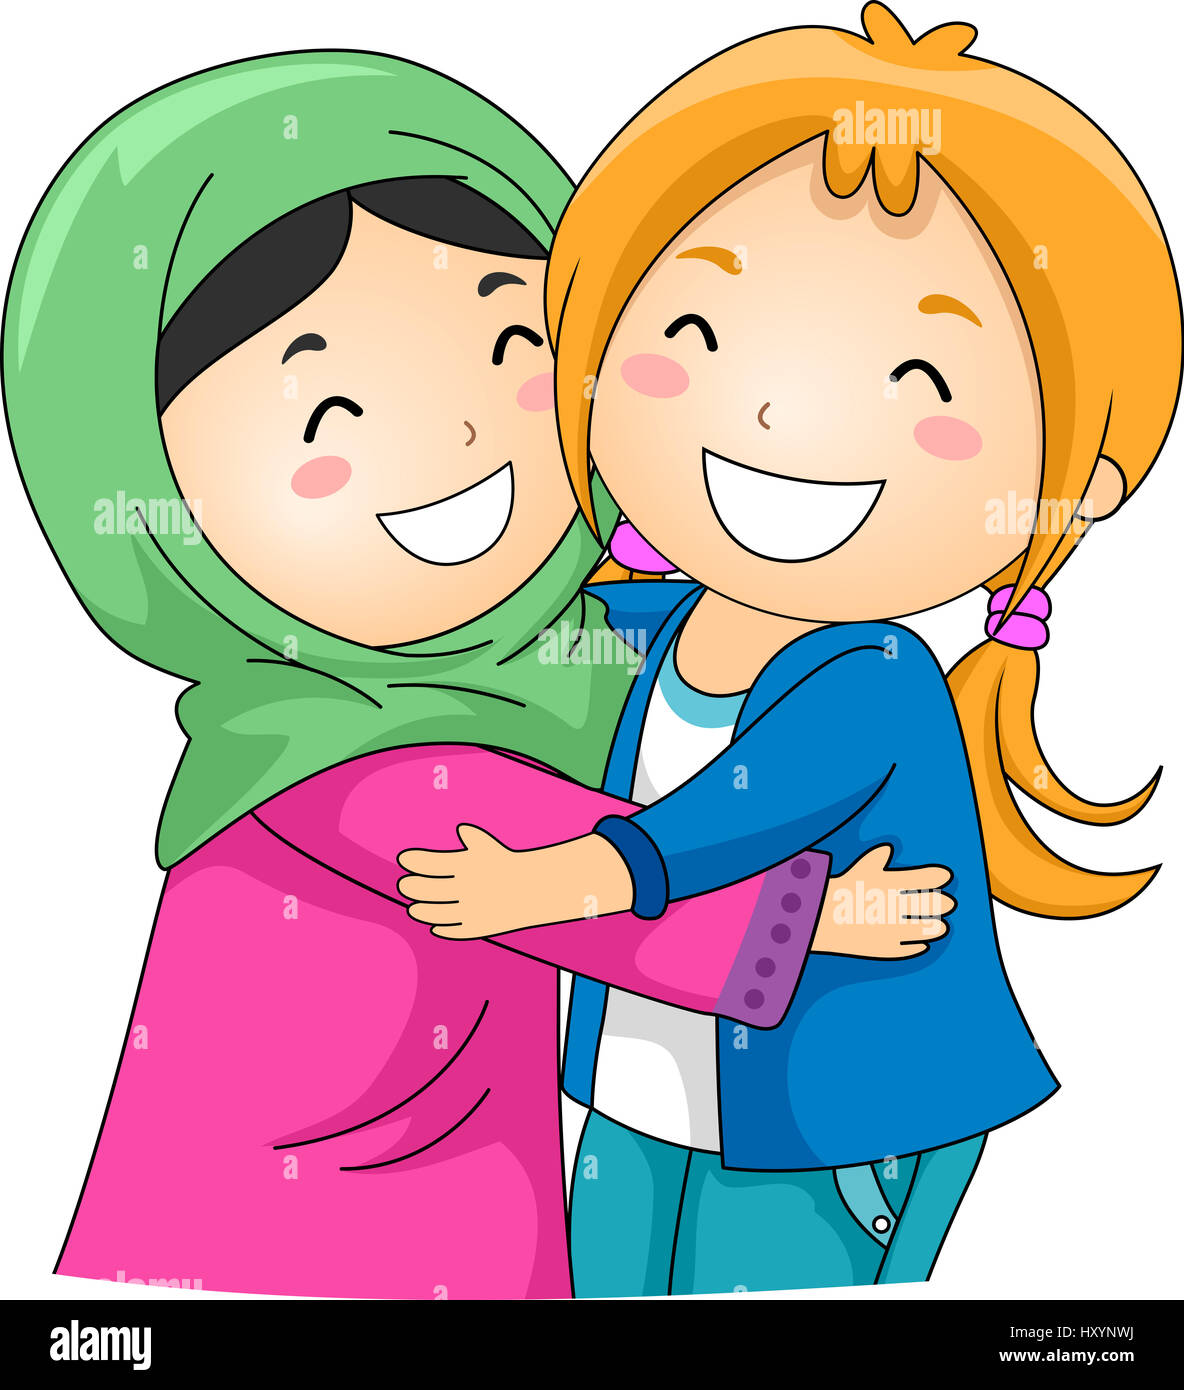 Illustration of a Muslim and a Non Muslim Girl Hugging Each Other Stock Photo